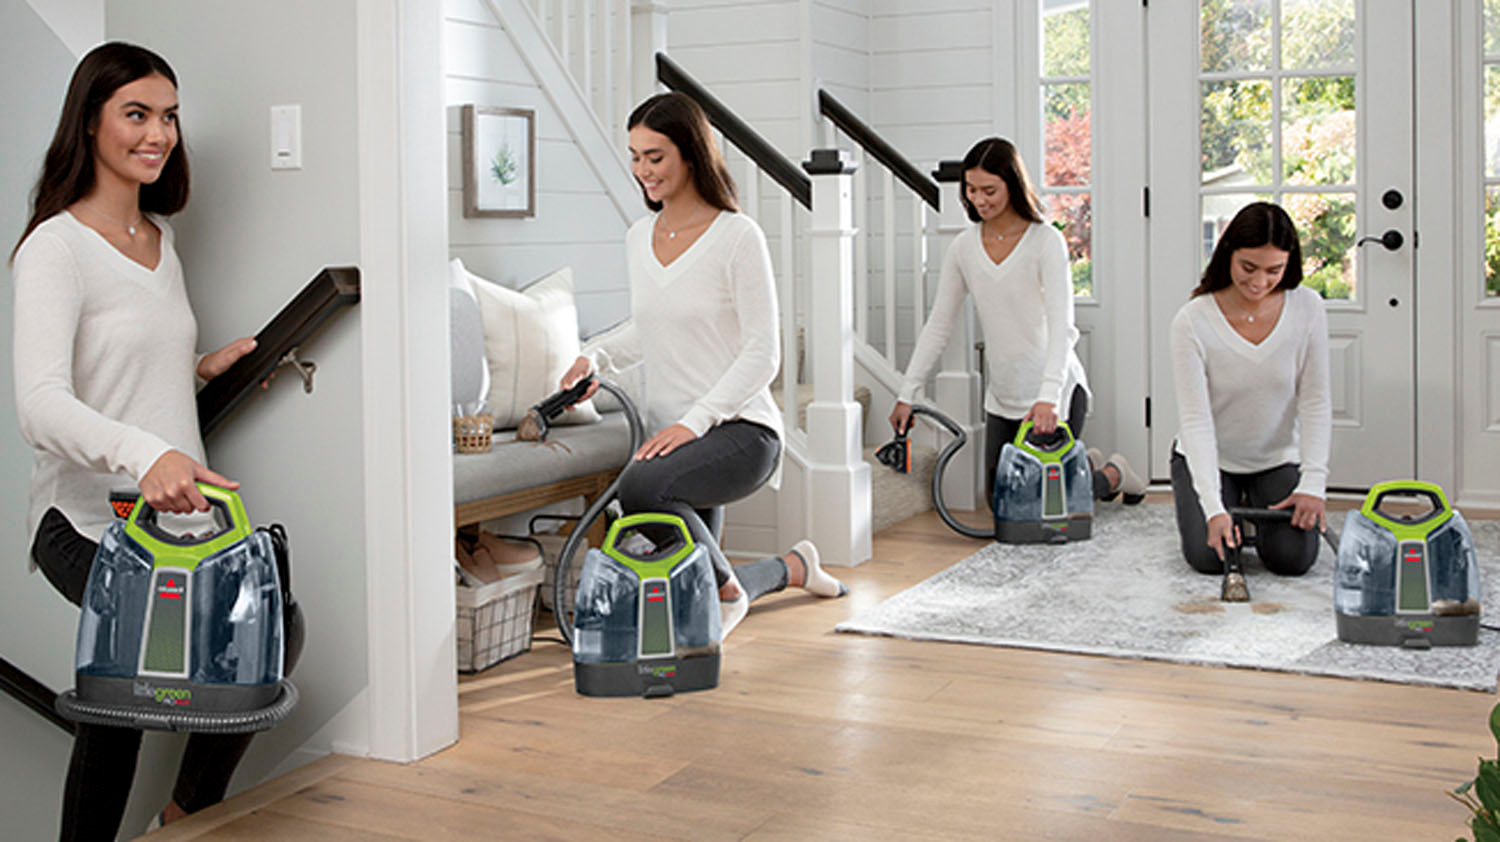 Bissell Little Green Proheat Machine - Portable Carpet & Upholstery Steam Cleaner